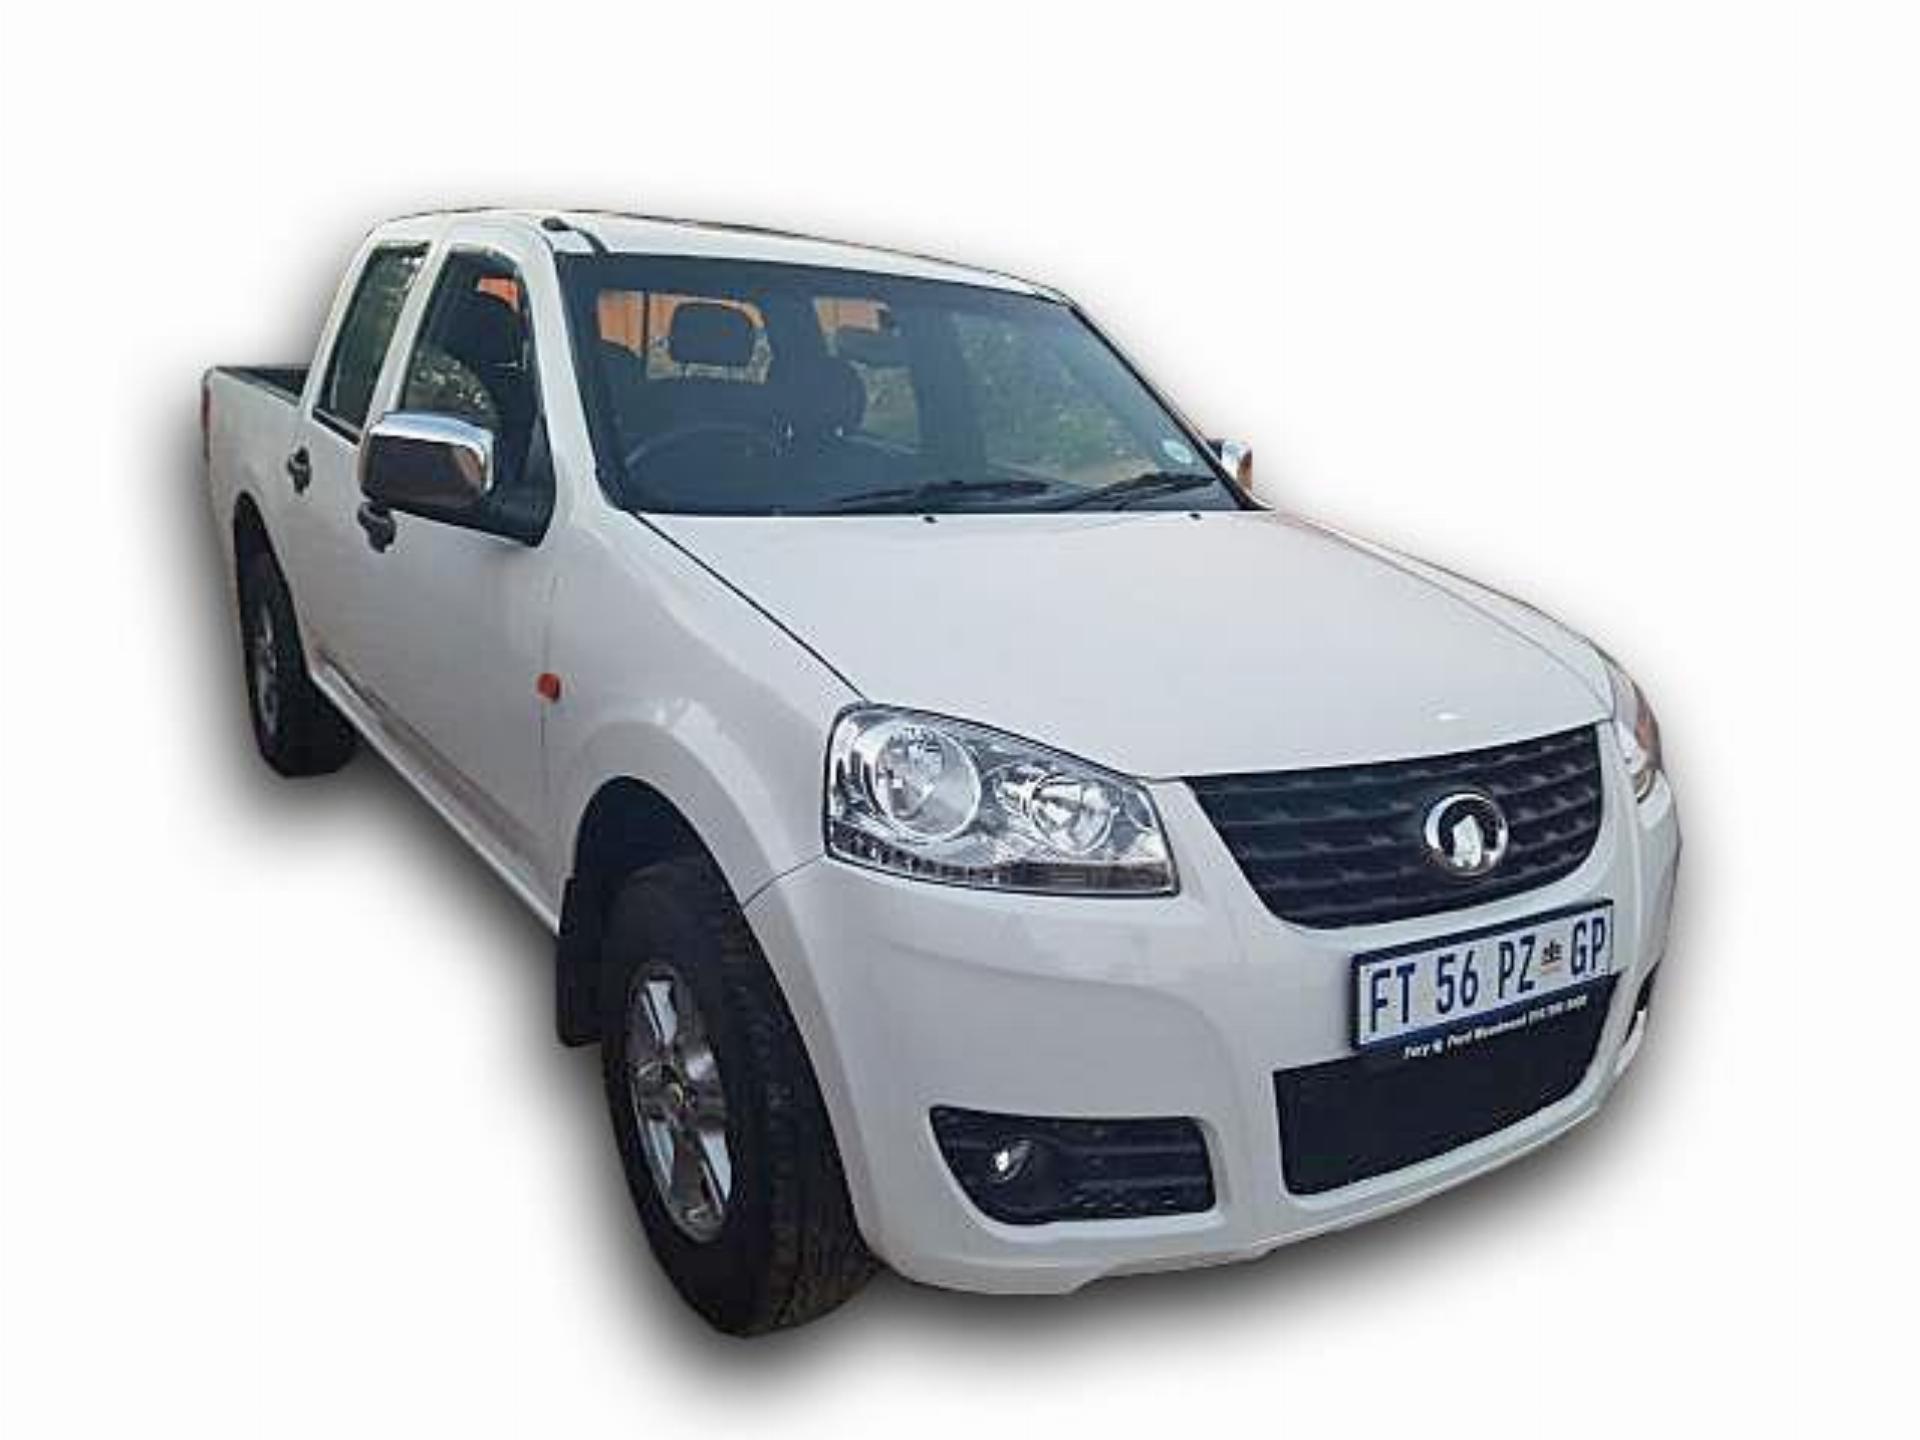 Steed 1 GWM Steed 5 2.2 Mpi Double Cab